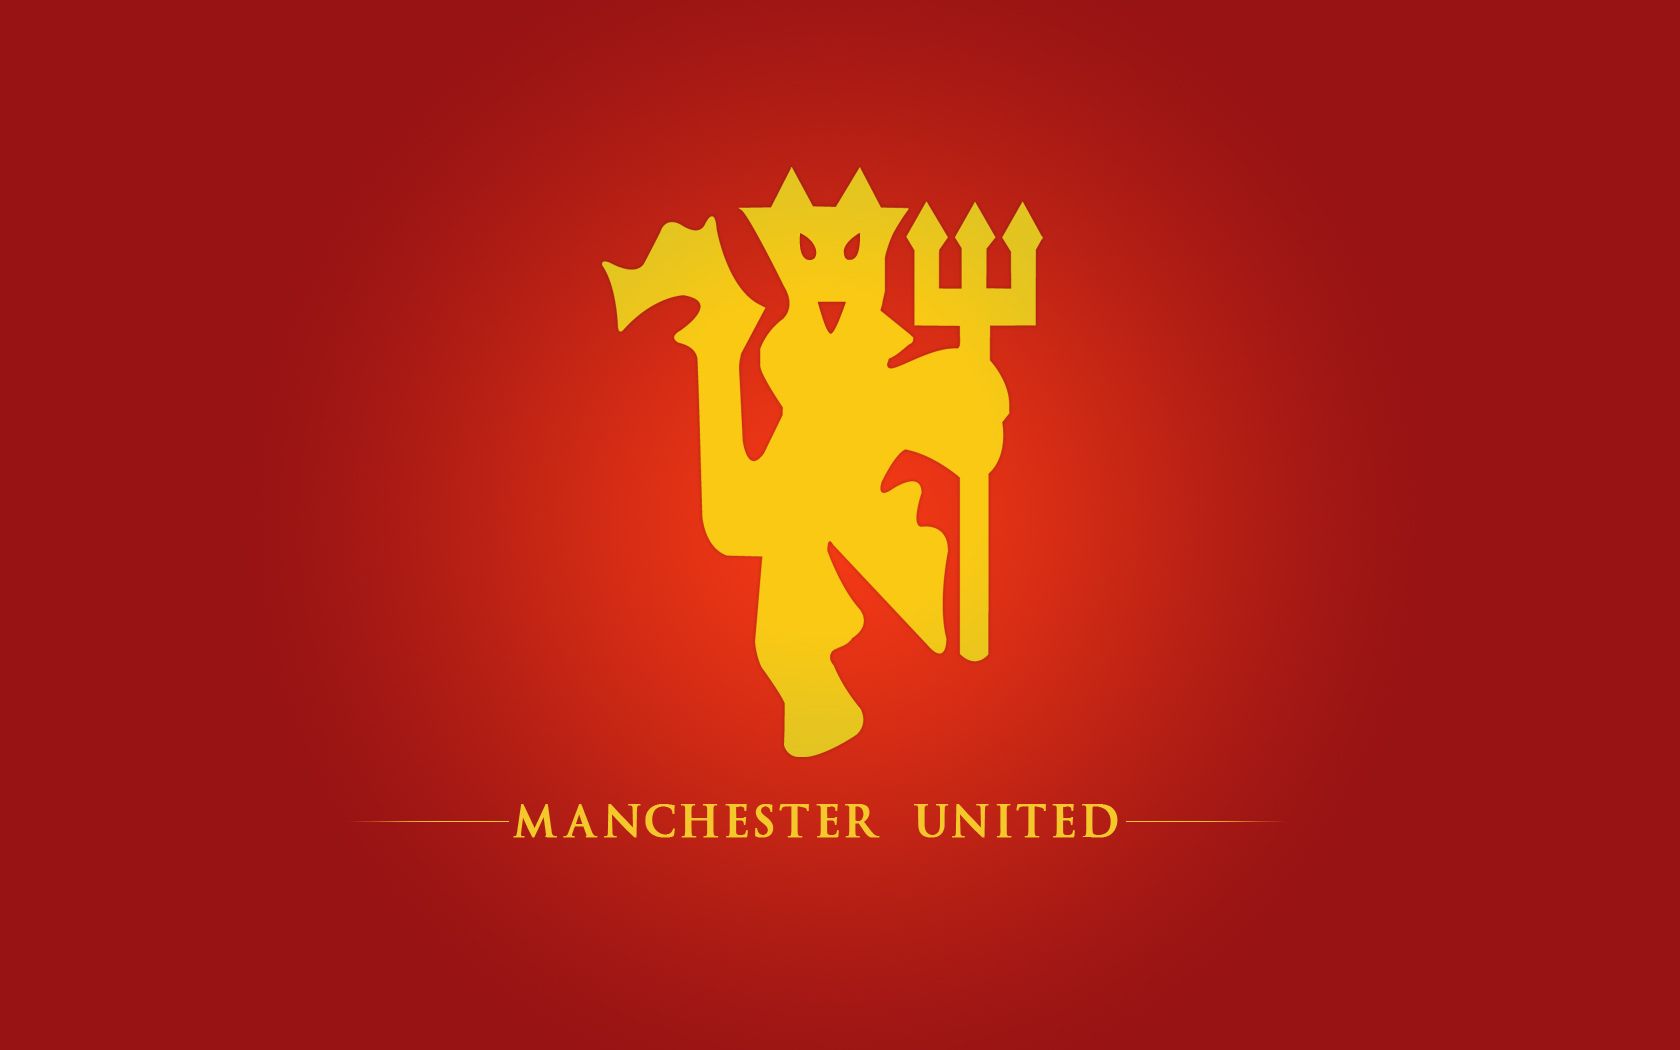 Clipart of the Manchester United Red Devil Logo free image